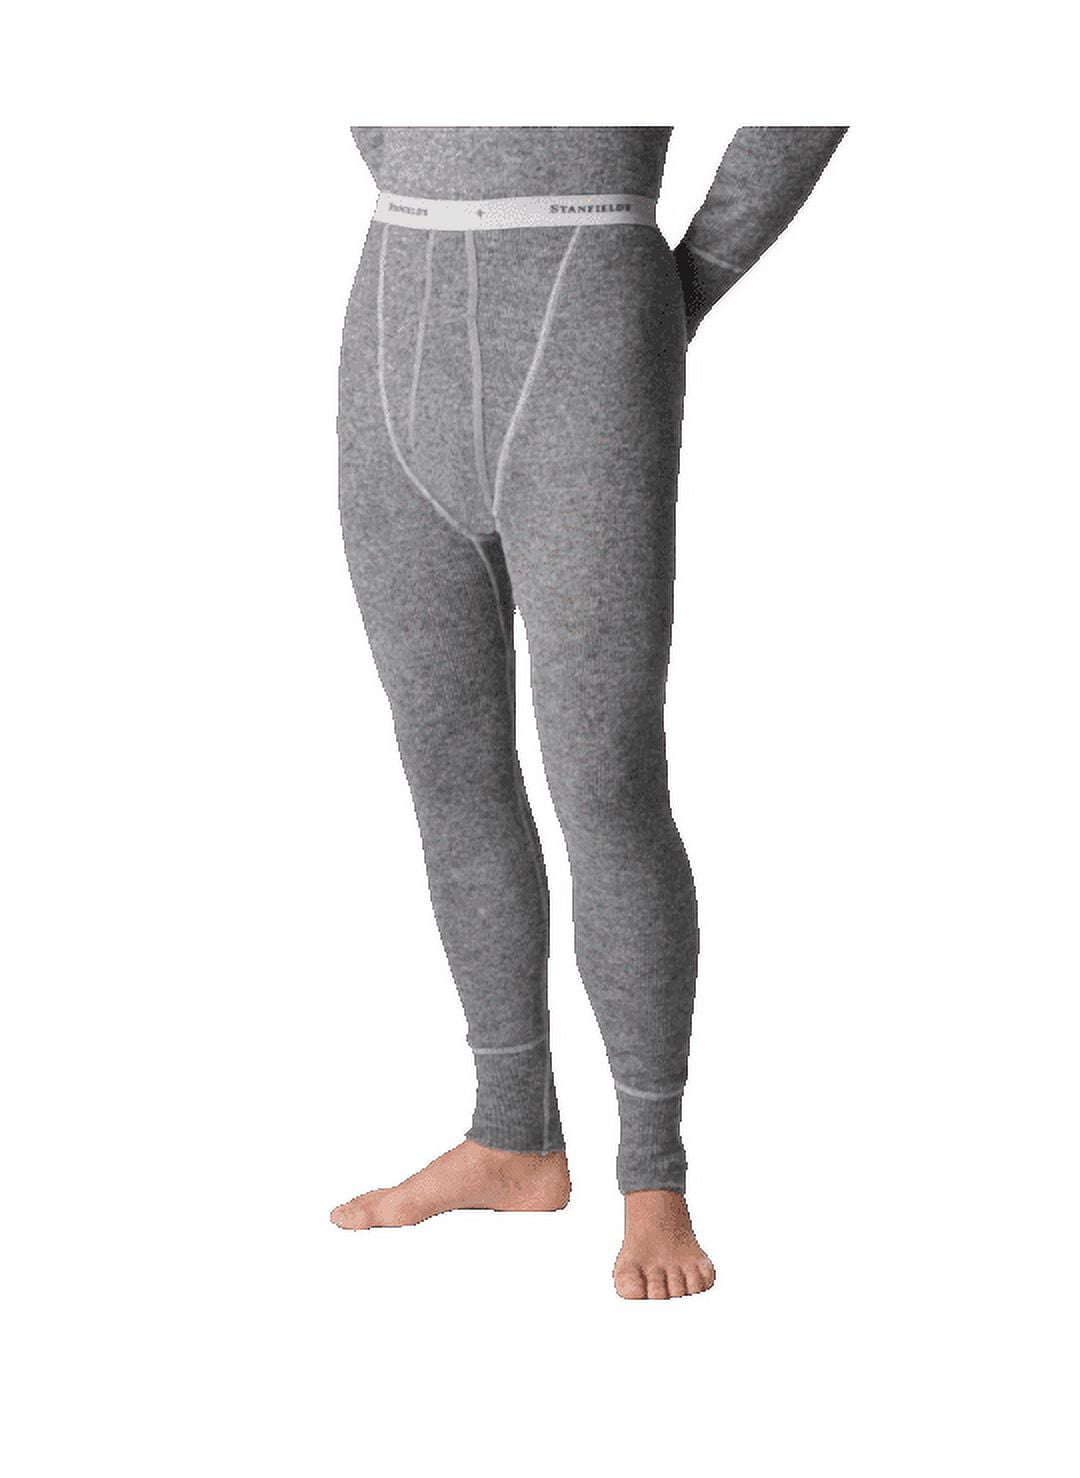 Essential's Men's Big and Tall Thermal Waffle Knit Long Johns 